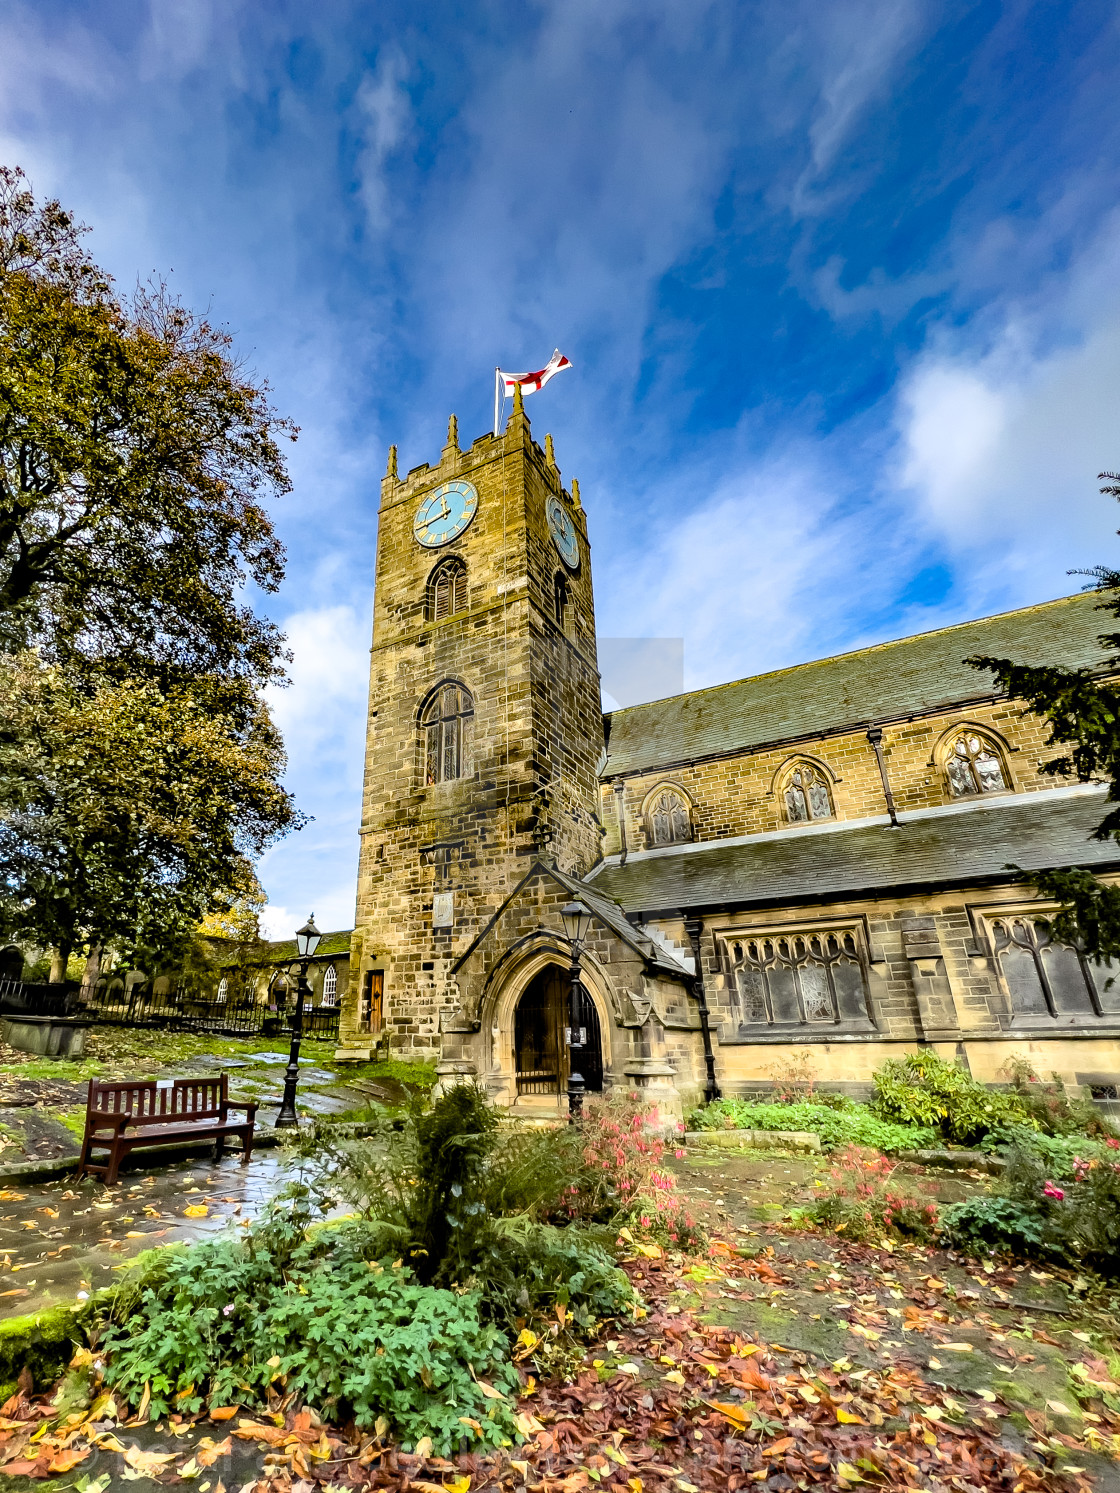 "St Michael and All Angels' Church, Haworth, Yorkshire. Bronte Country." stock image